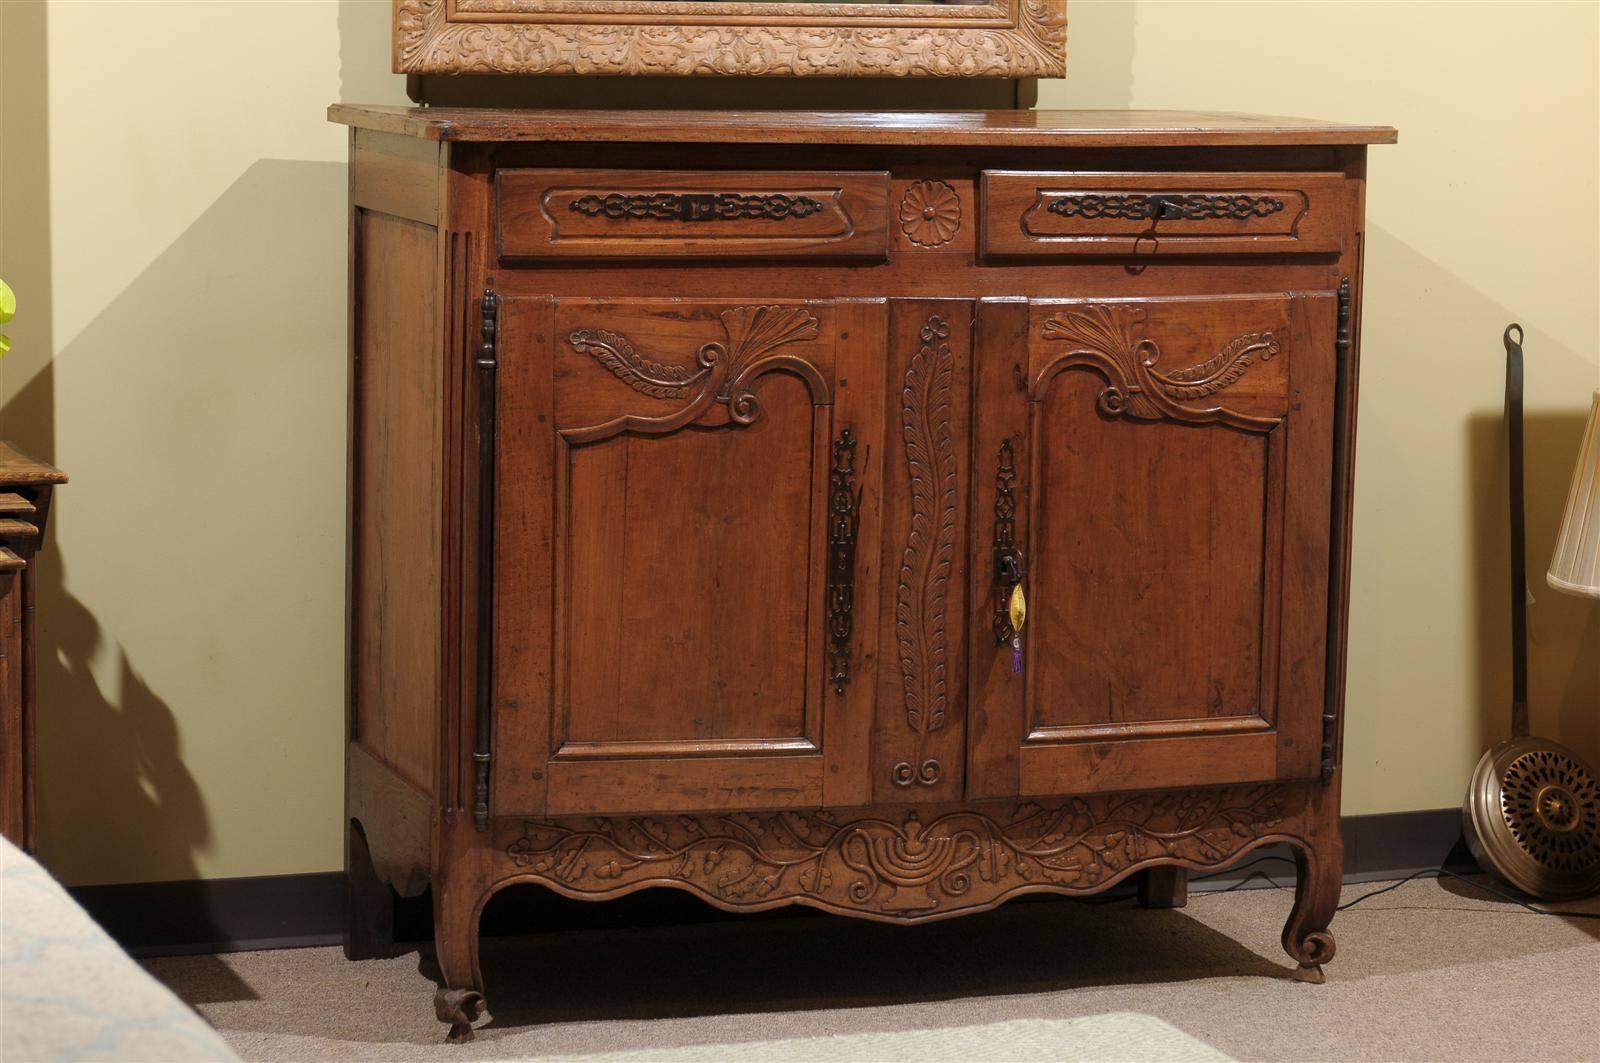 This beautiful buffet has very unusual carvings. We love the carved feathers that adorn the doors and center piece. And the apron has a wandering vine of acorns and leaves. This buffet has a rich patina and a very sought after moderate depth of 22